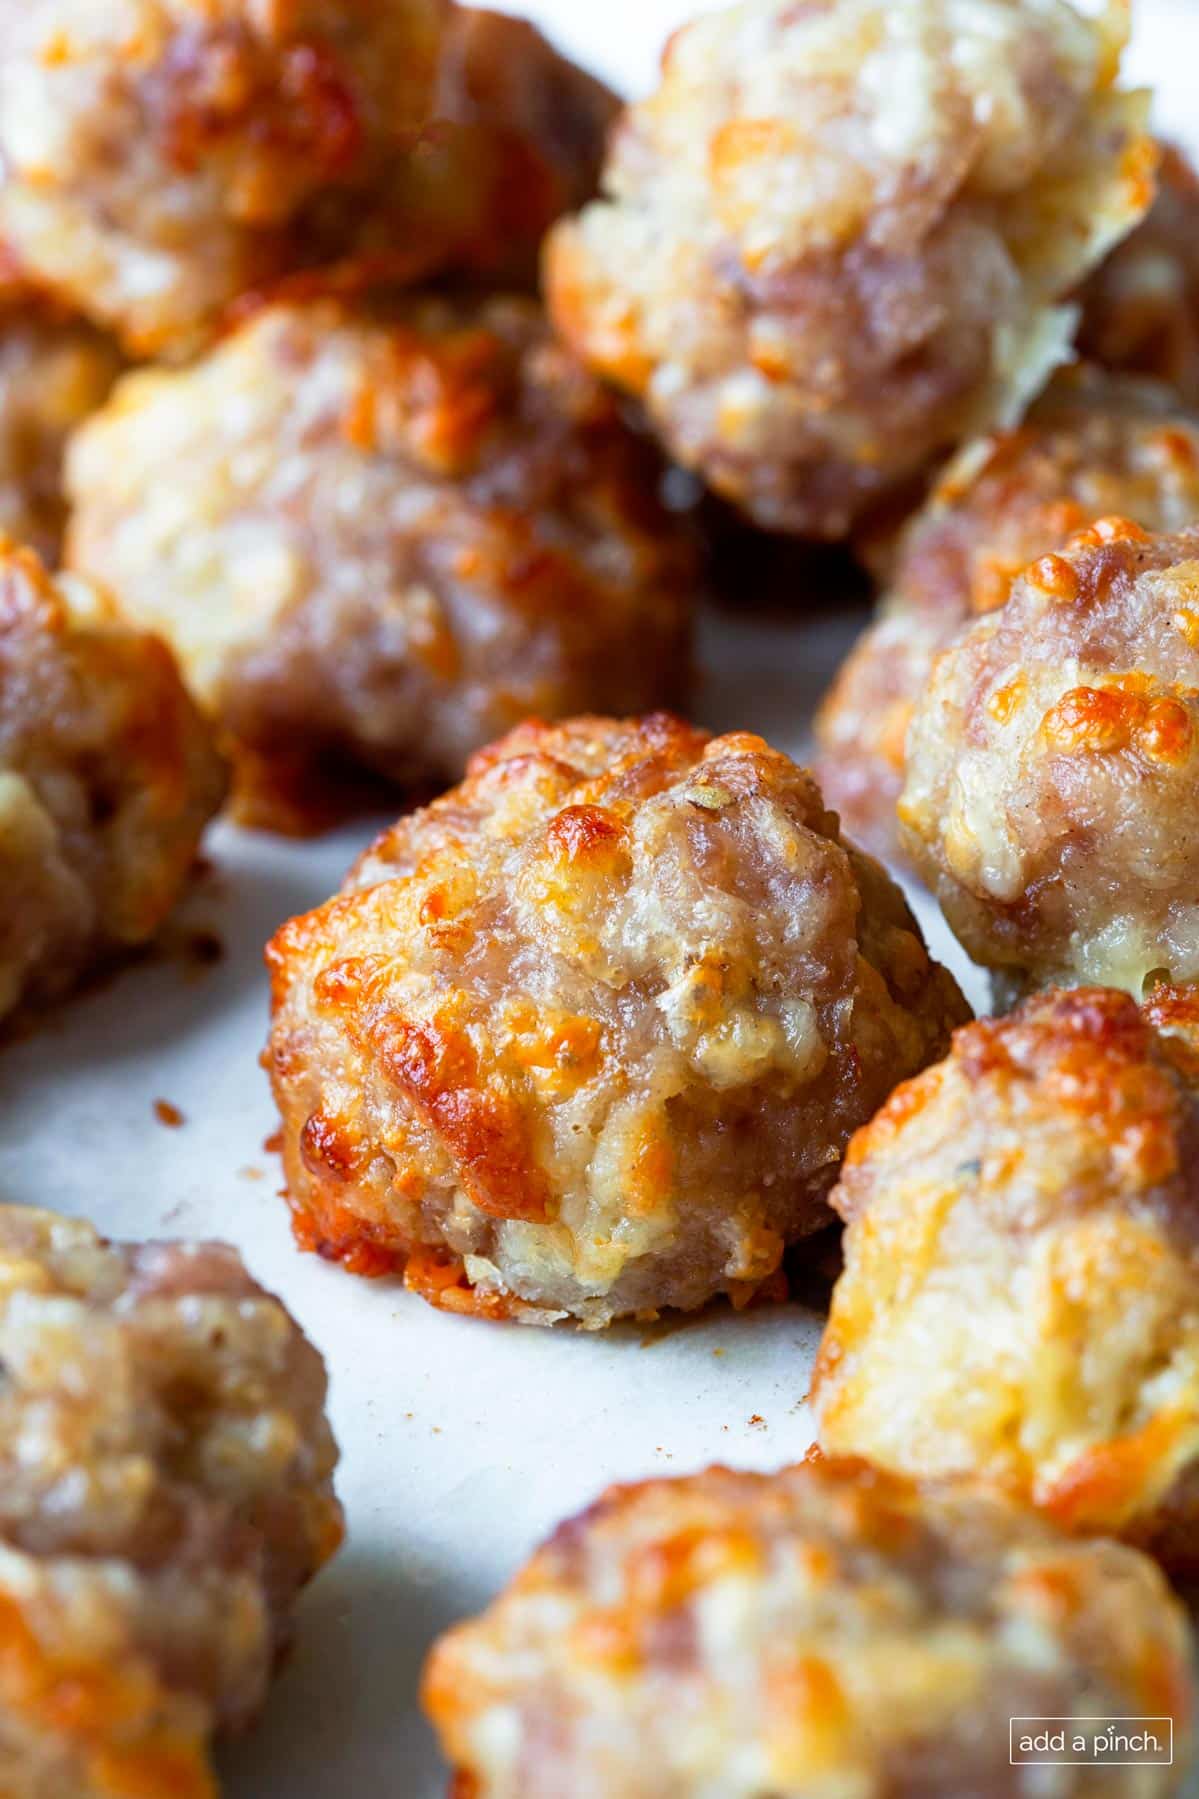 Up close image of cooked sausage balls.